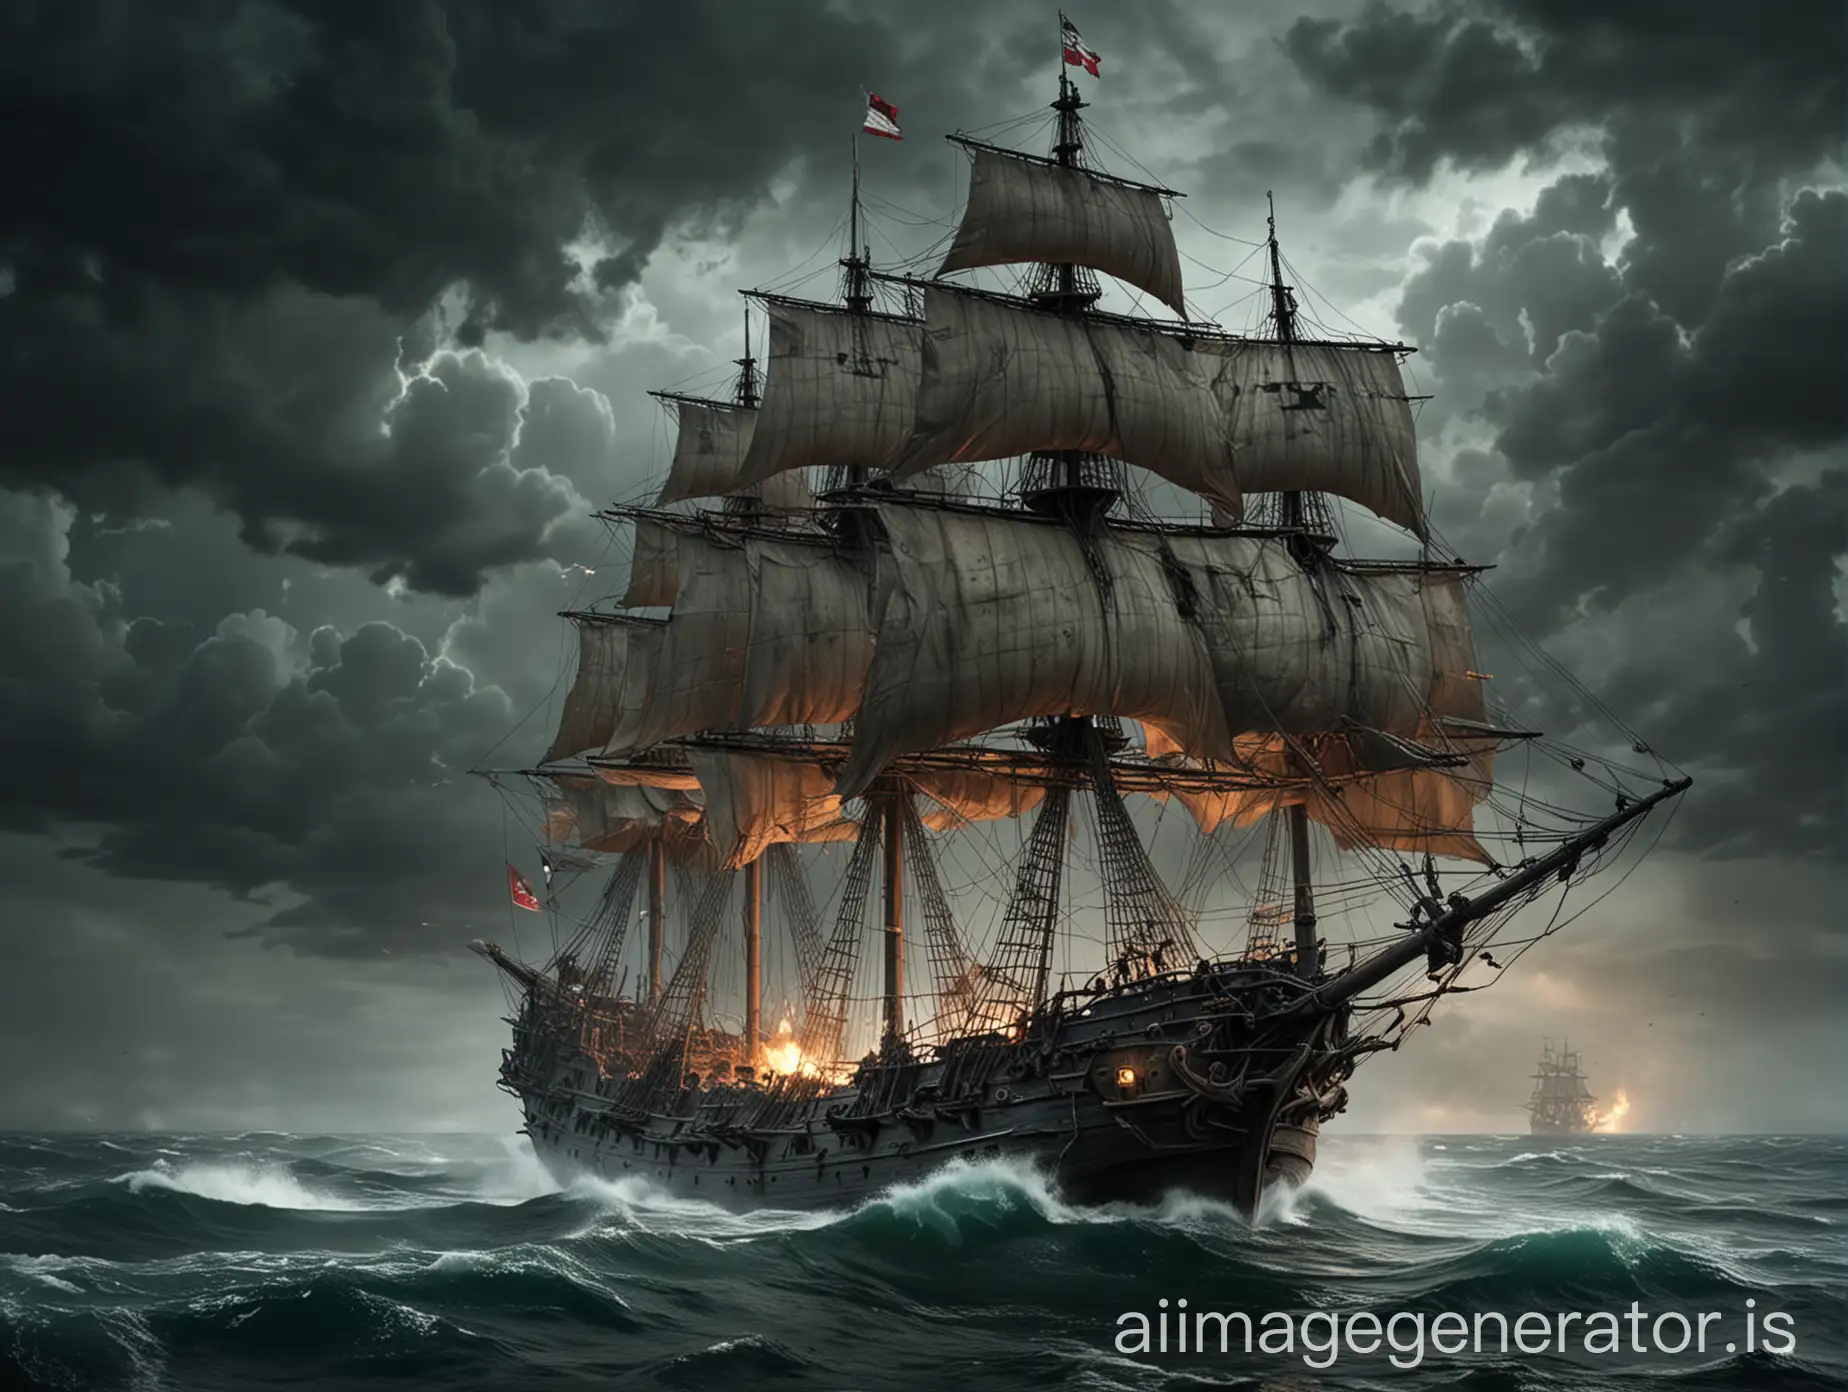 the flying dutchman war ship, ghost ship, sailing in a storm, in battle, firing cannons